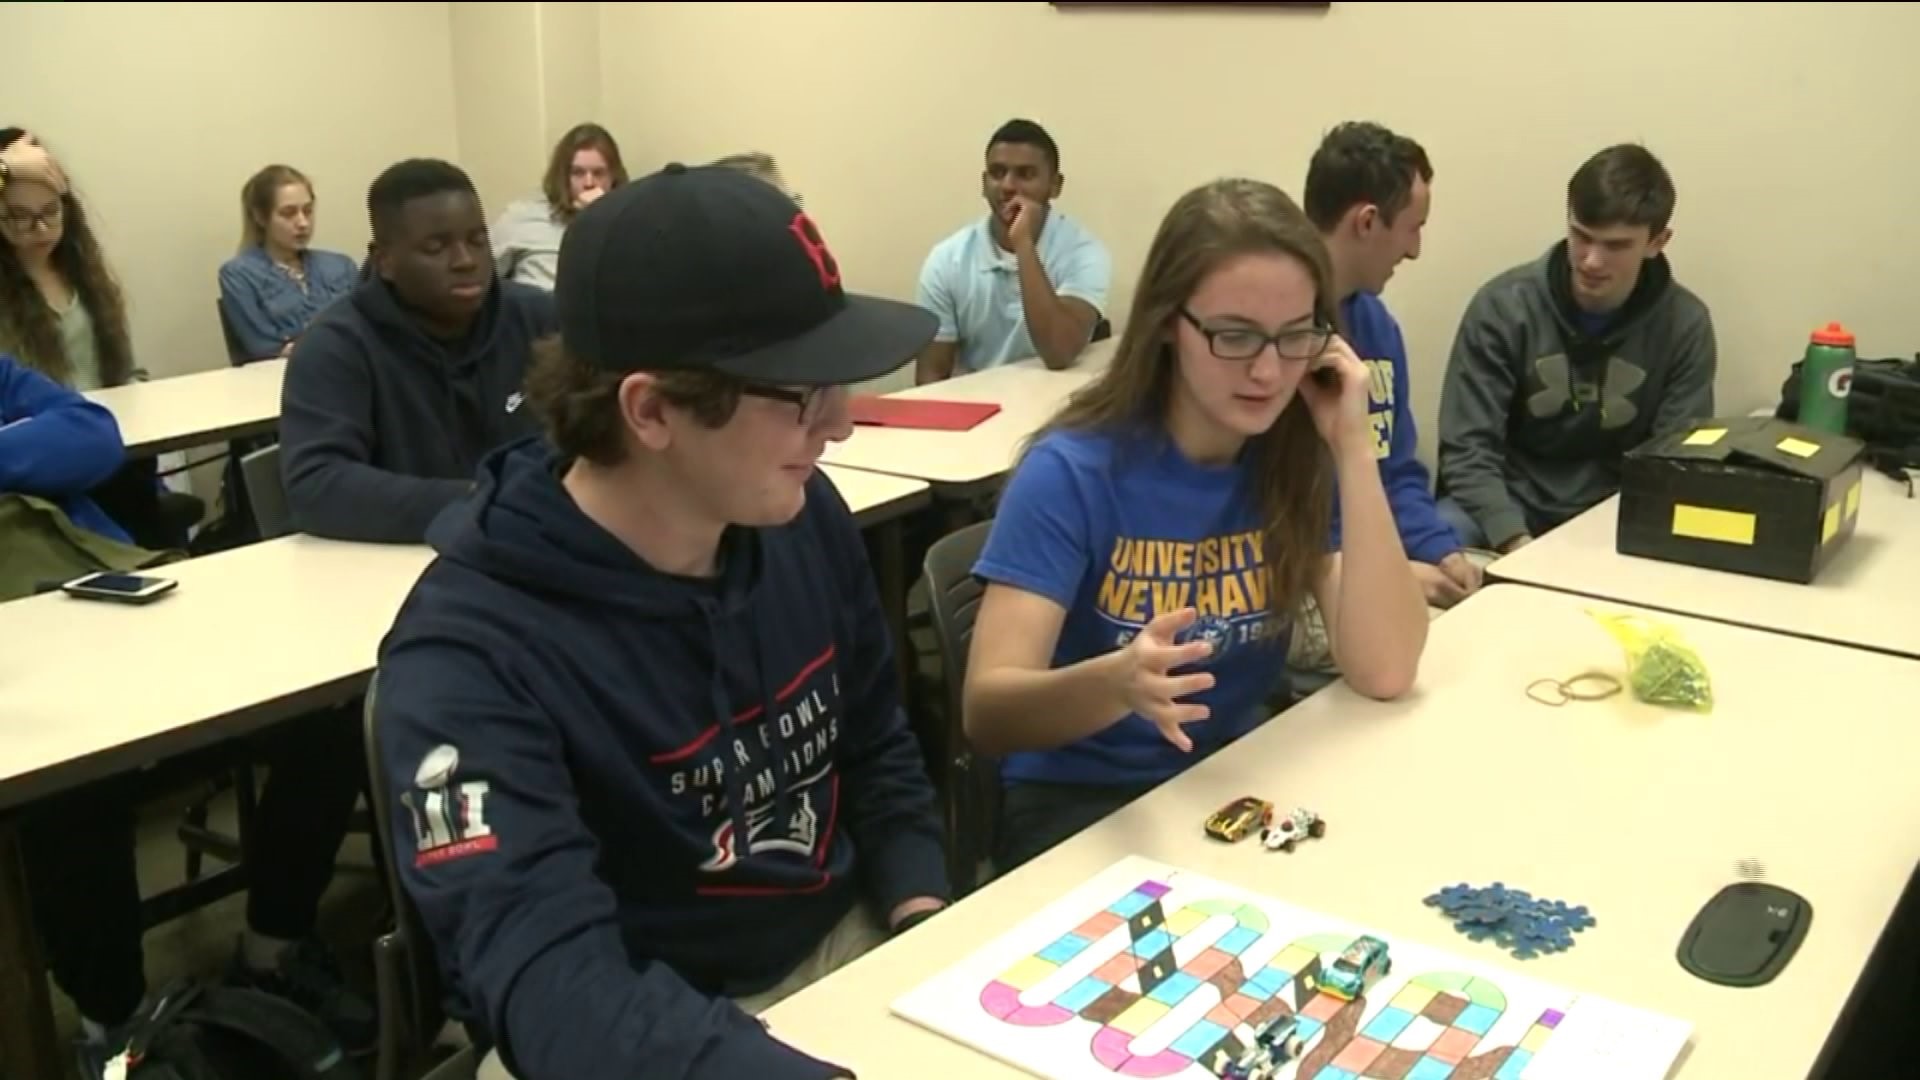 University of New Haven class develops game for children with autism